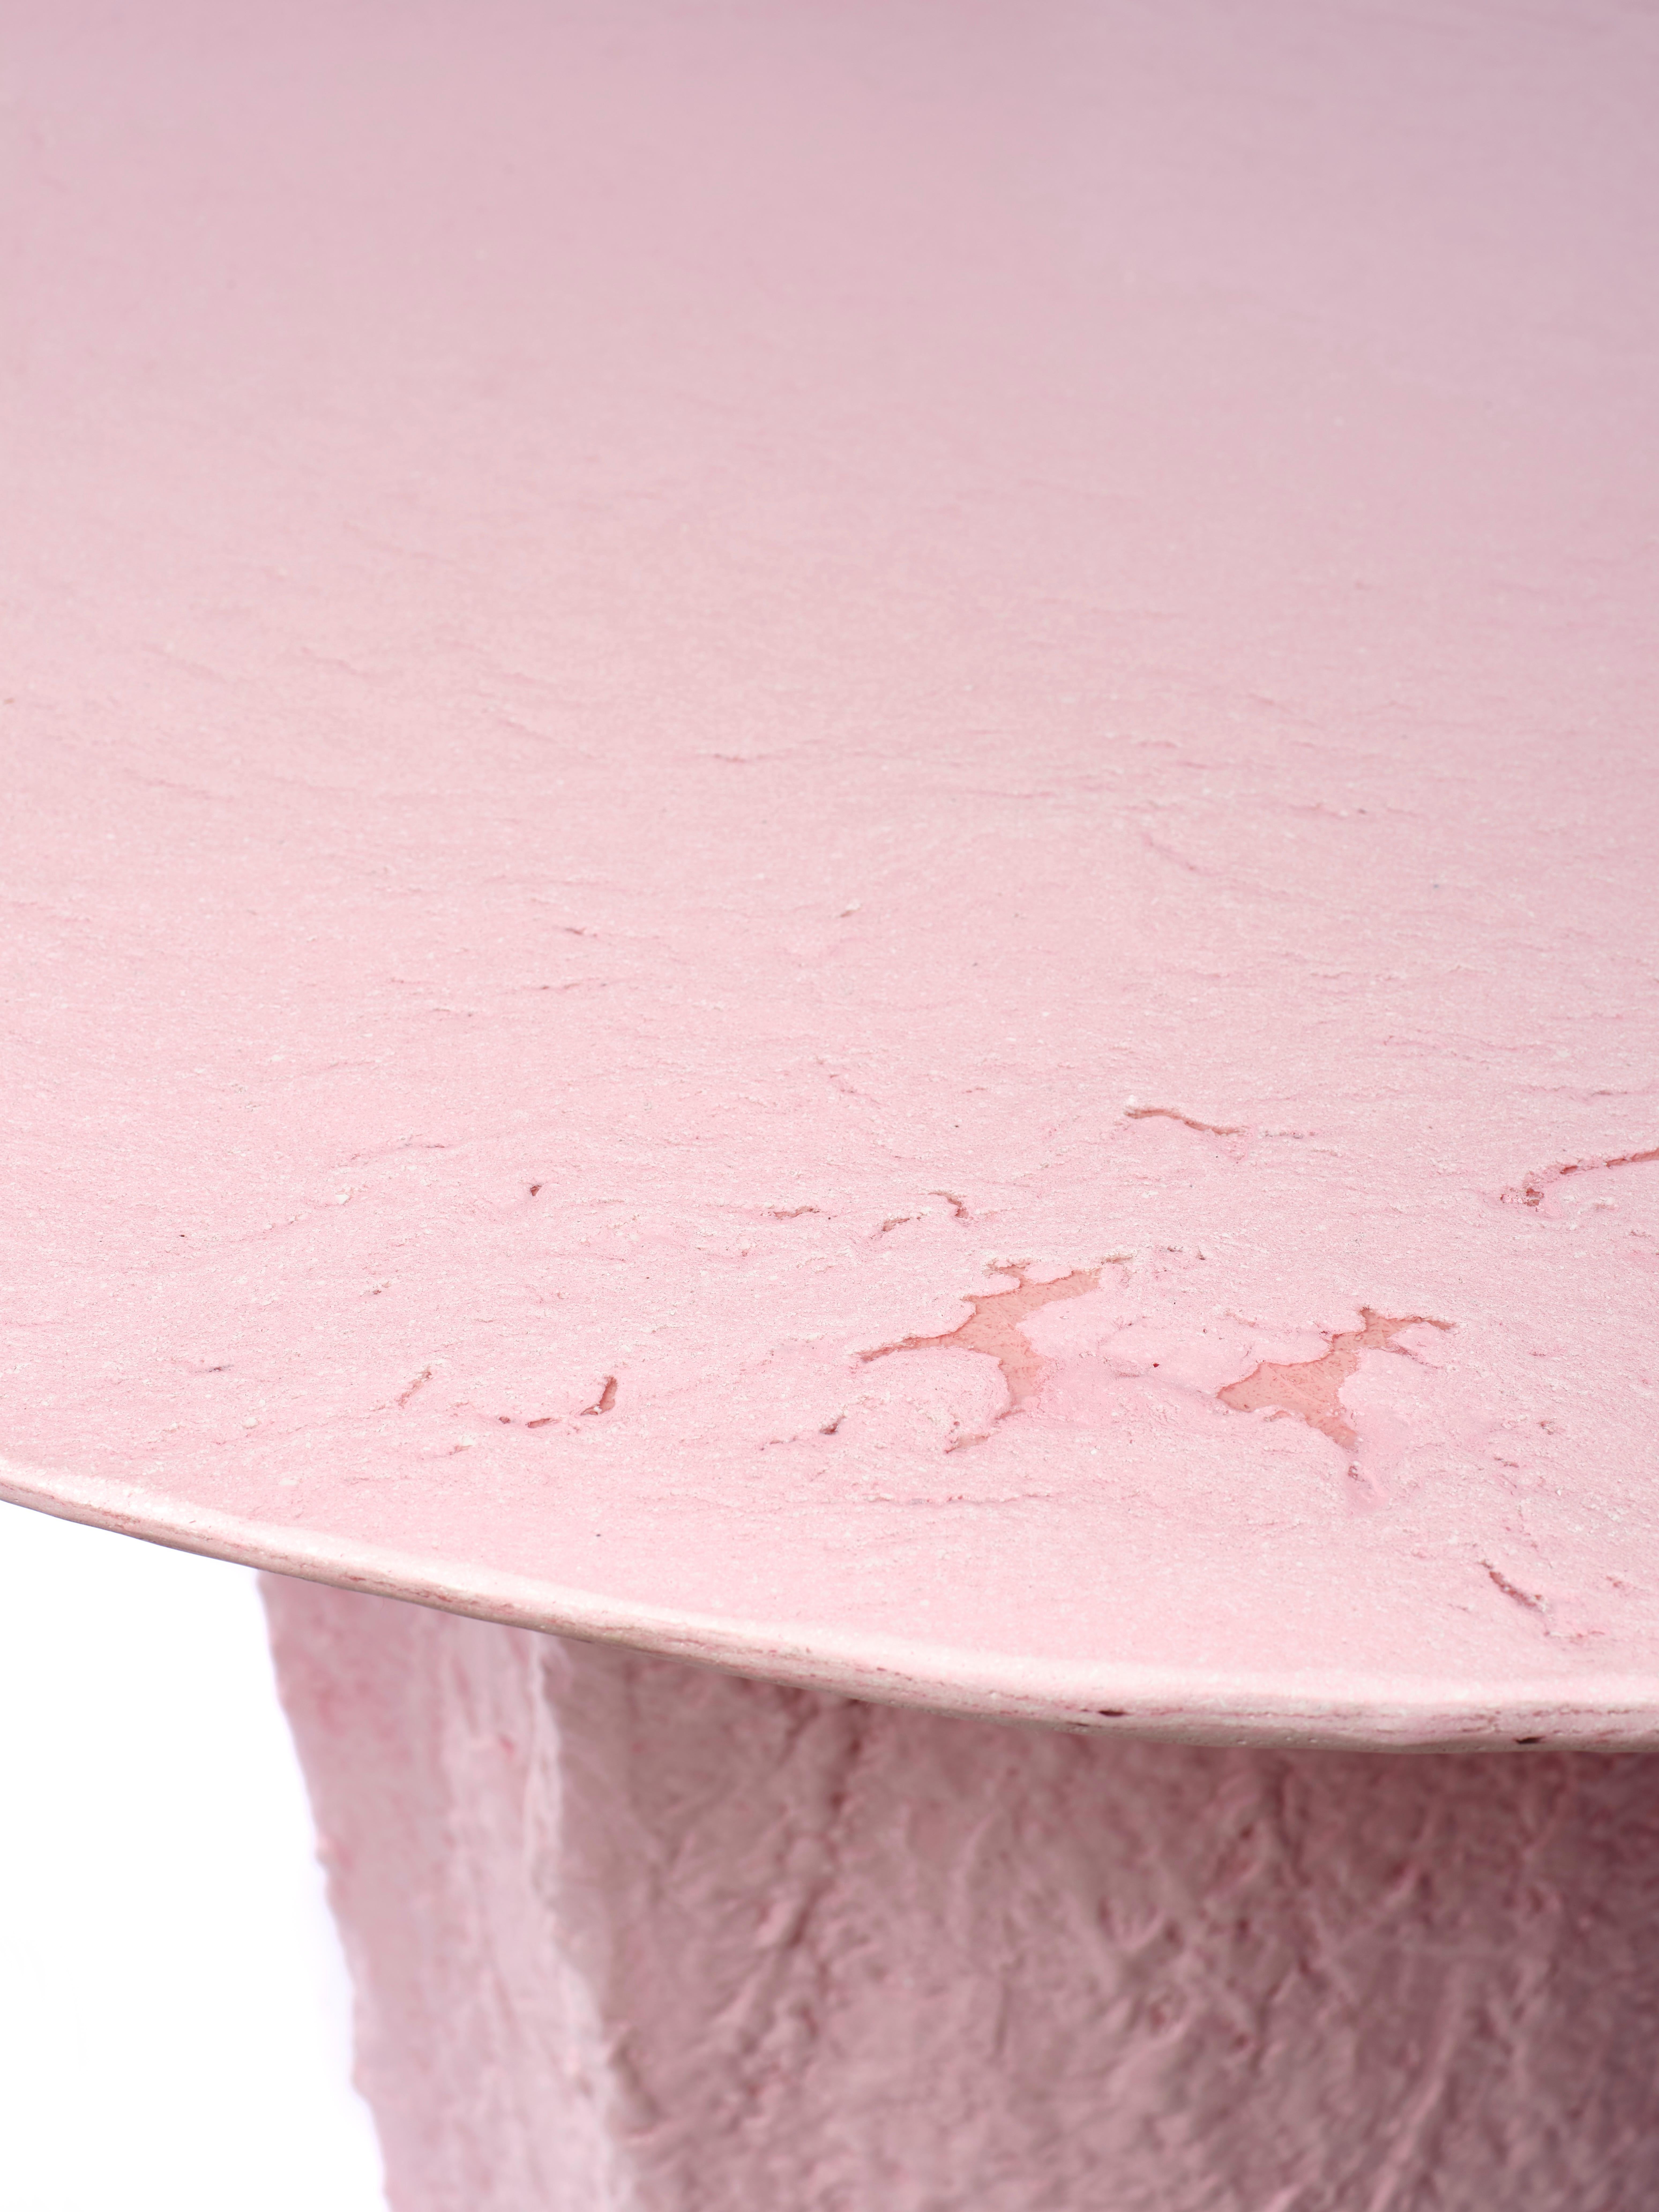 The pink Kernel table is a unique piece made entirely by hand by the designer. Completely built in Glebanite, a special blend of recycled and recyclable fiberglass. An artistic work of circular economy that takes care of the planet earth and our